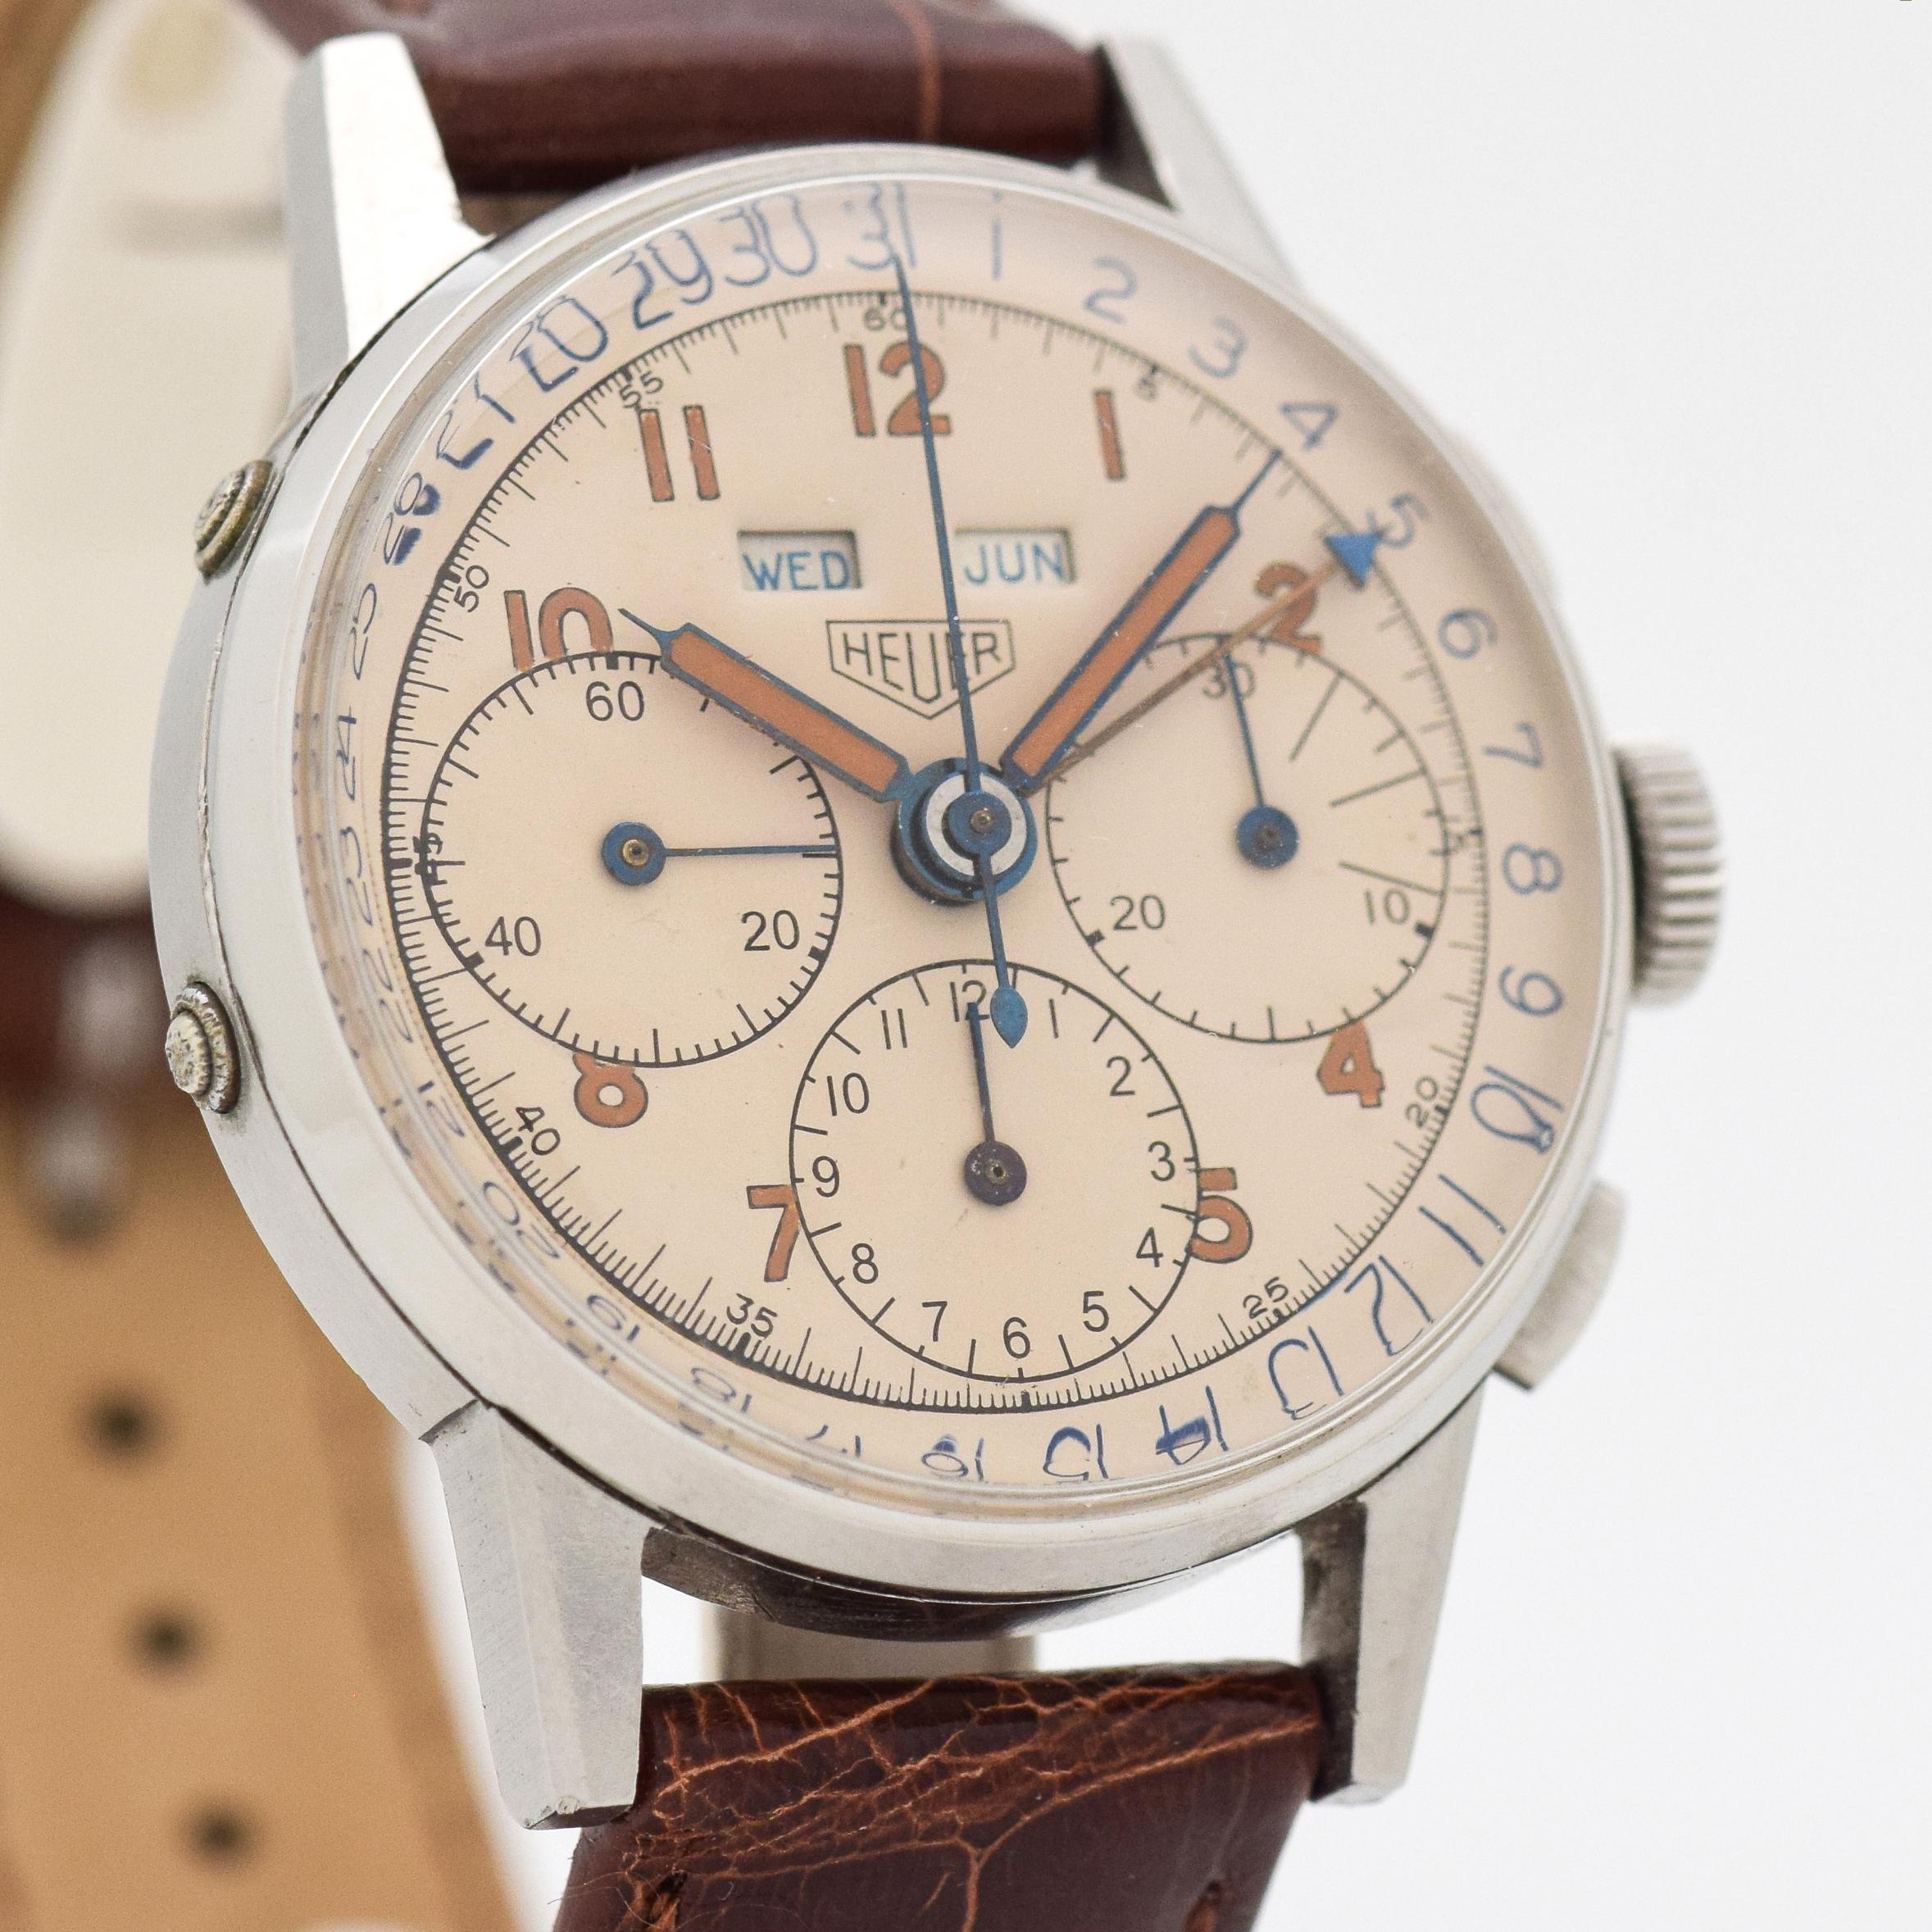 1940's Vintage Heuer Triple Date Chronograph Watch. Stainless Steel case. Original, but restored silver dial with Arabic numerals. Powered by a 17-jewel, Valjoux 72-C movement. 35mm x 43mm lug to lug (1.38 in. x 1.69 in.) - Equipped with a Glossy,